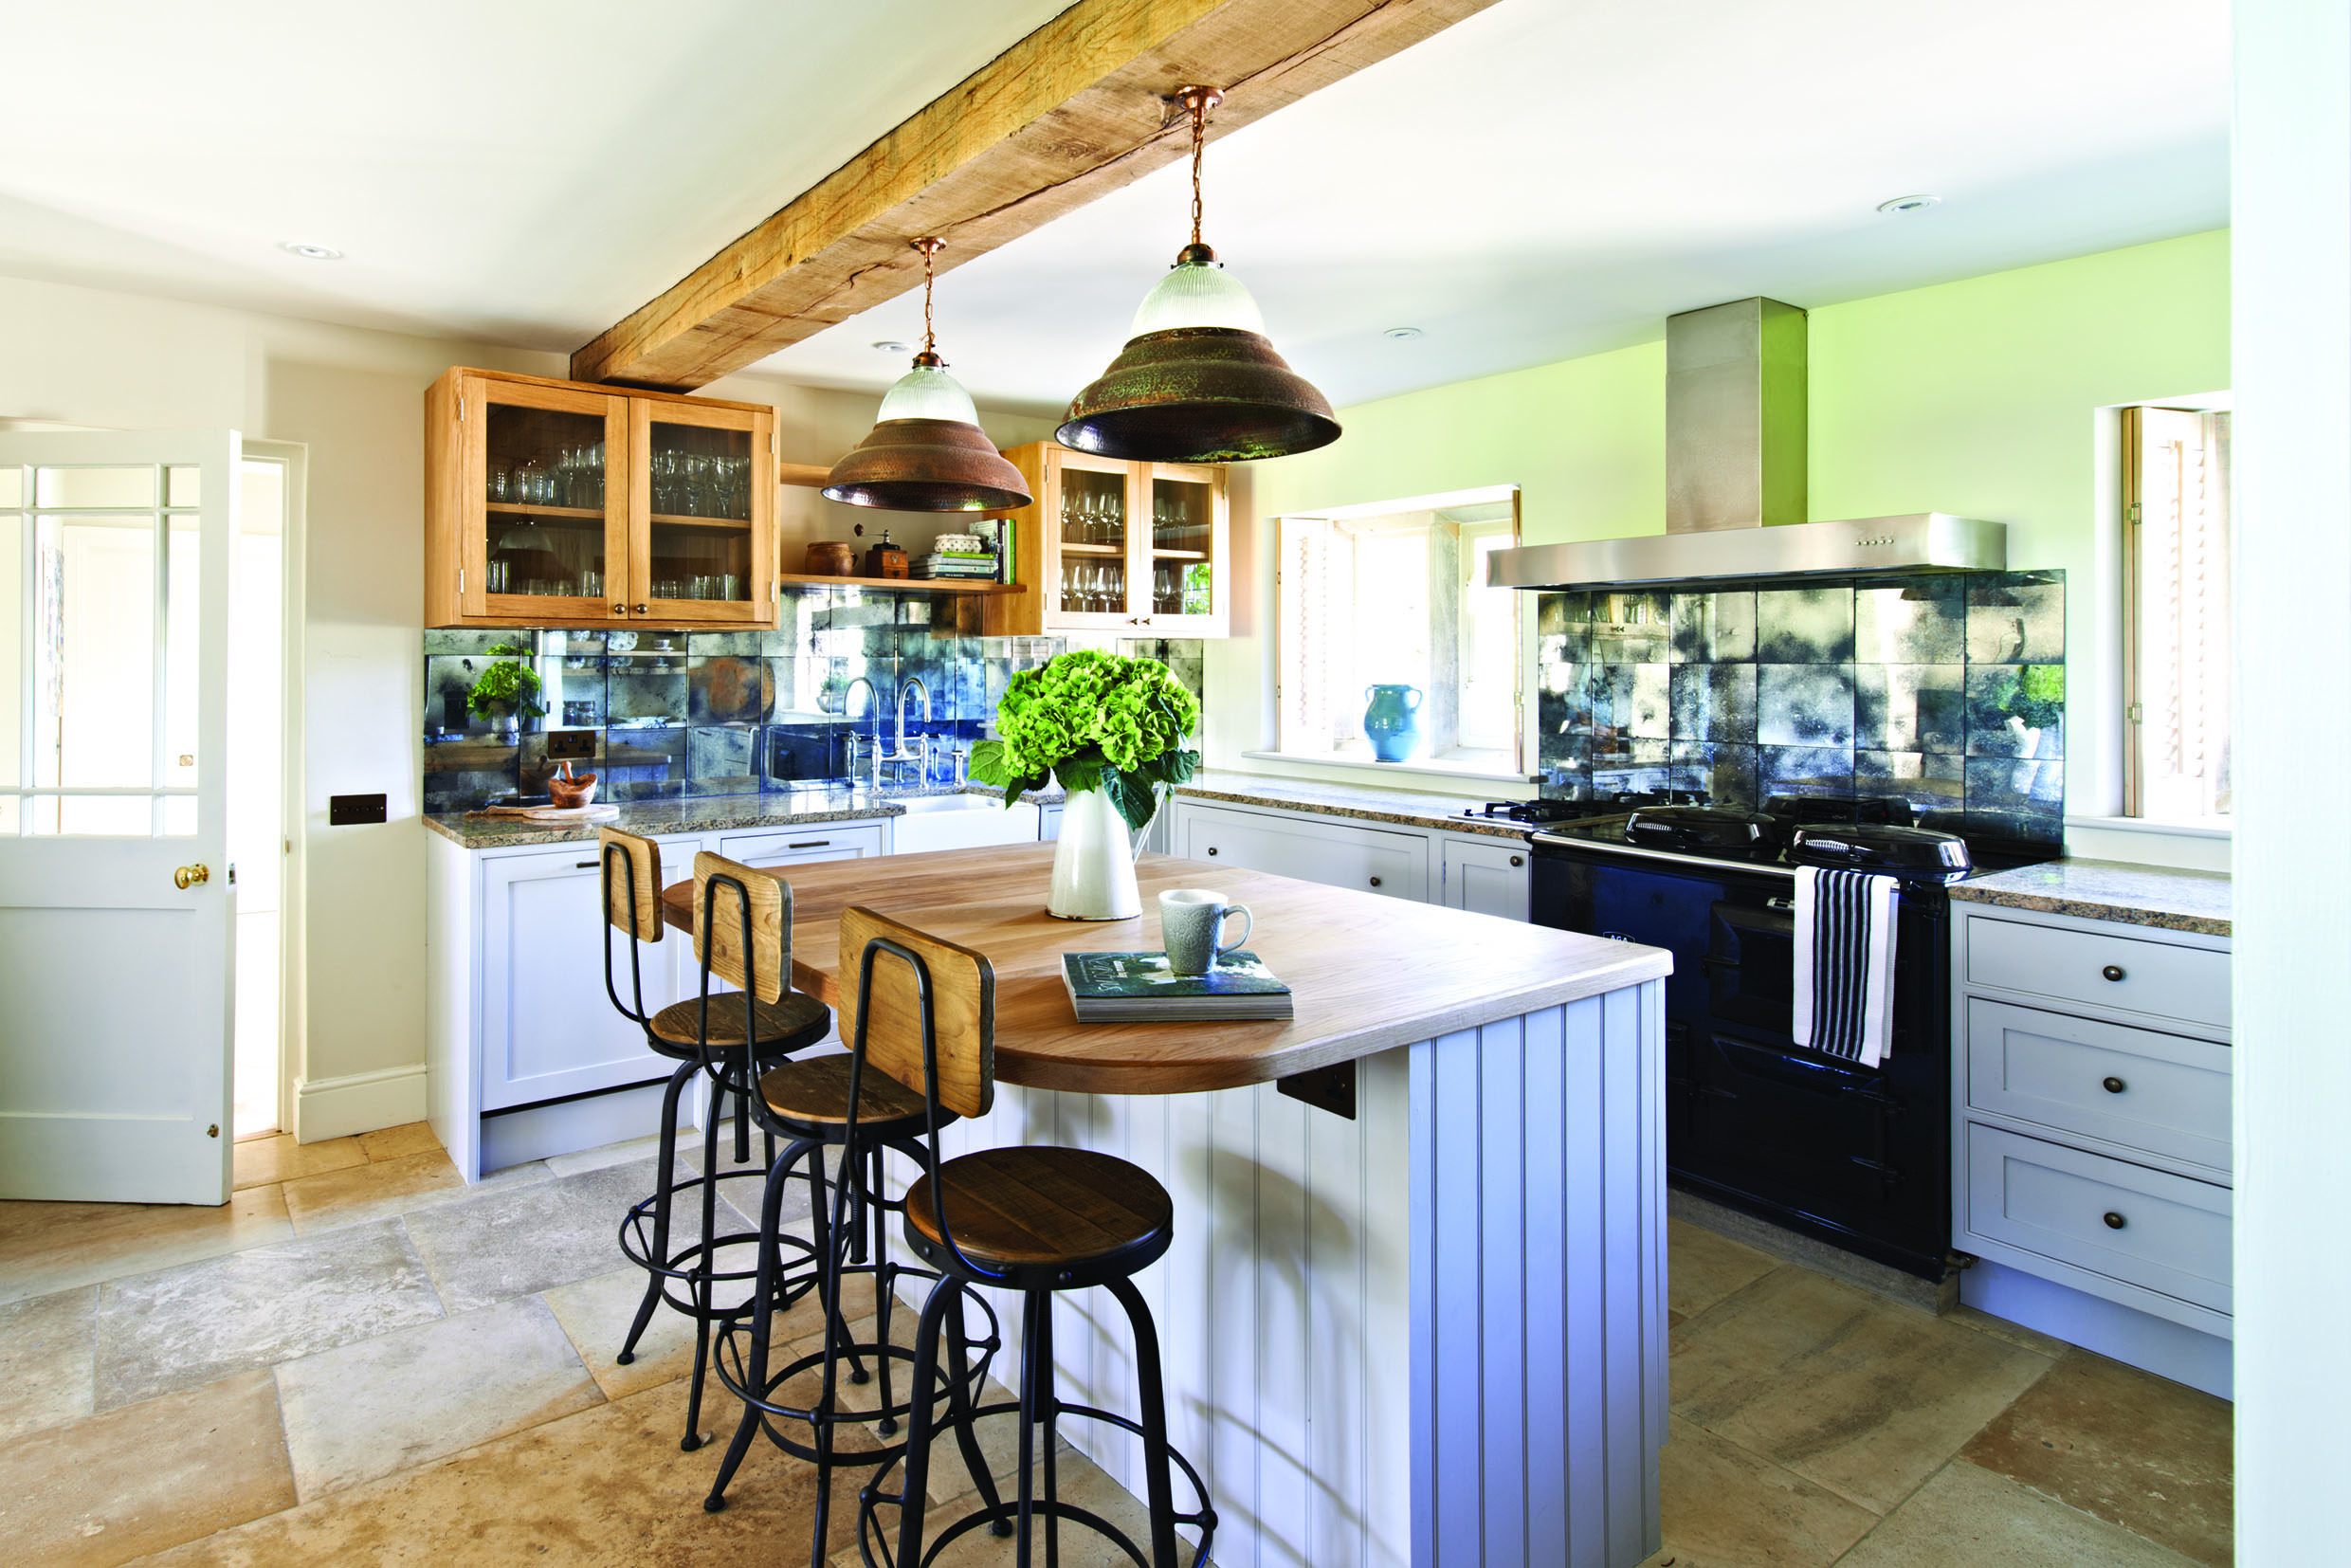 These are the most popular kitchen trends on Instagram | Real Homes